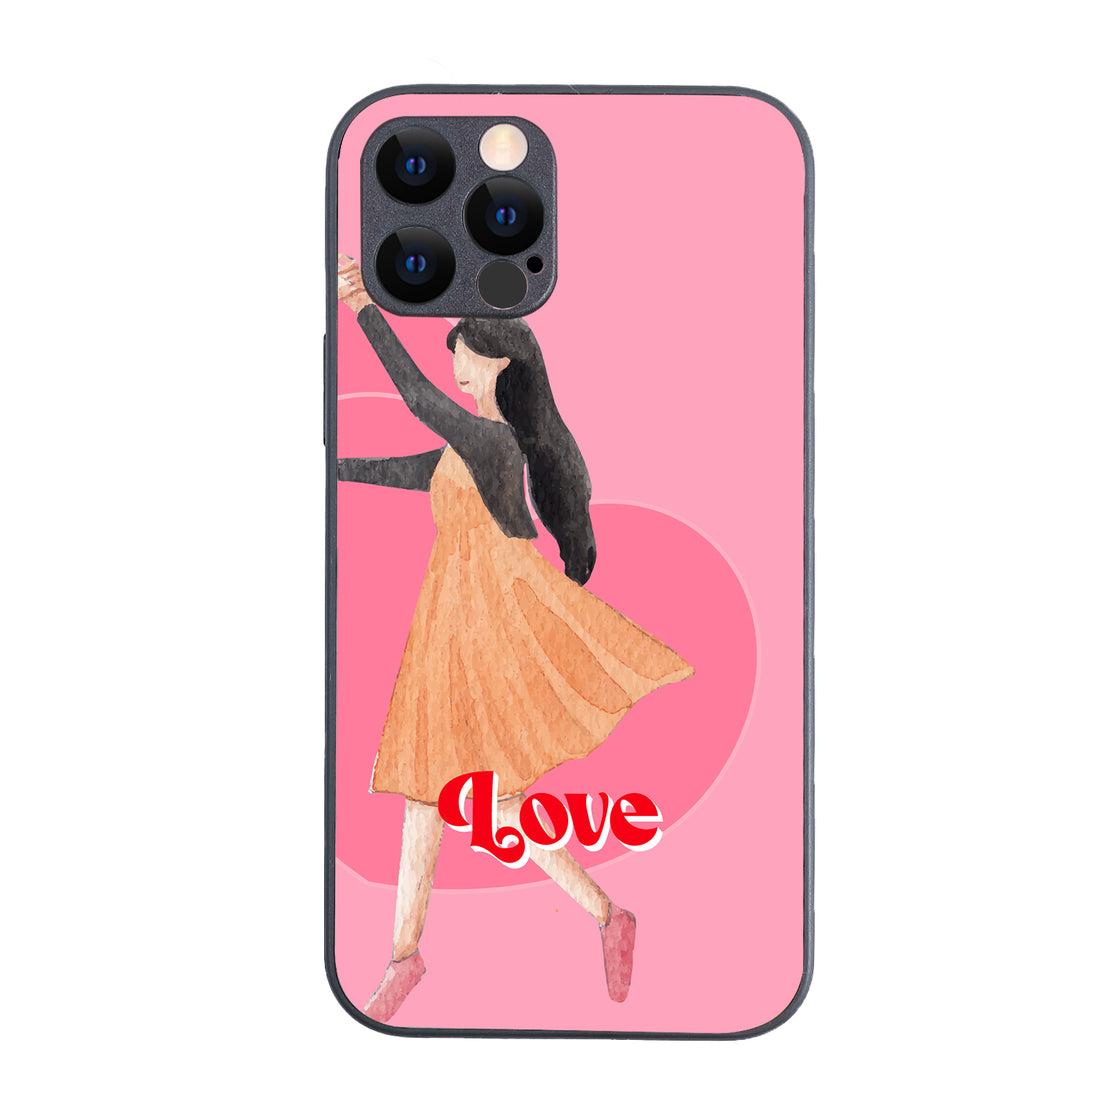 Forever Love Girl Couple iPhone 12 Pro Case